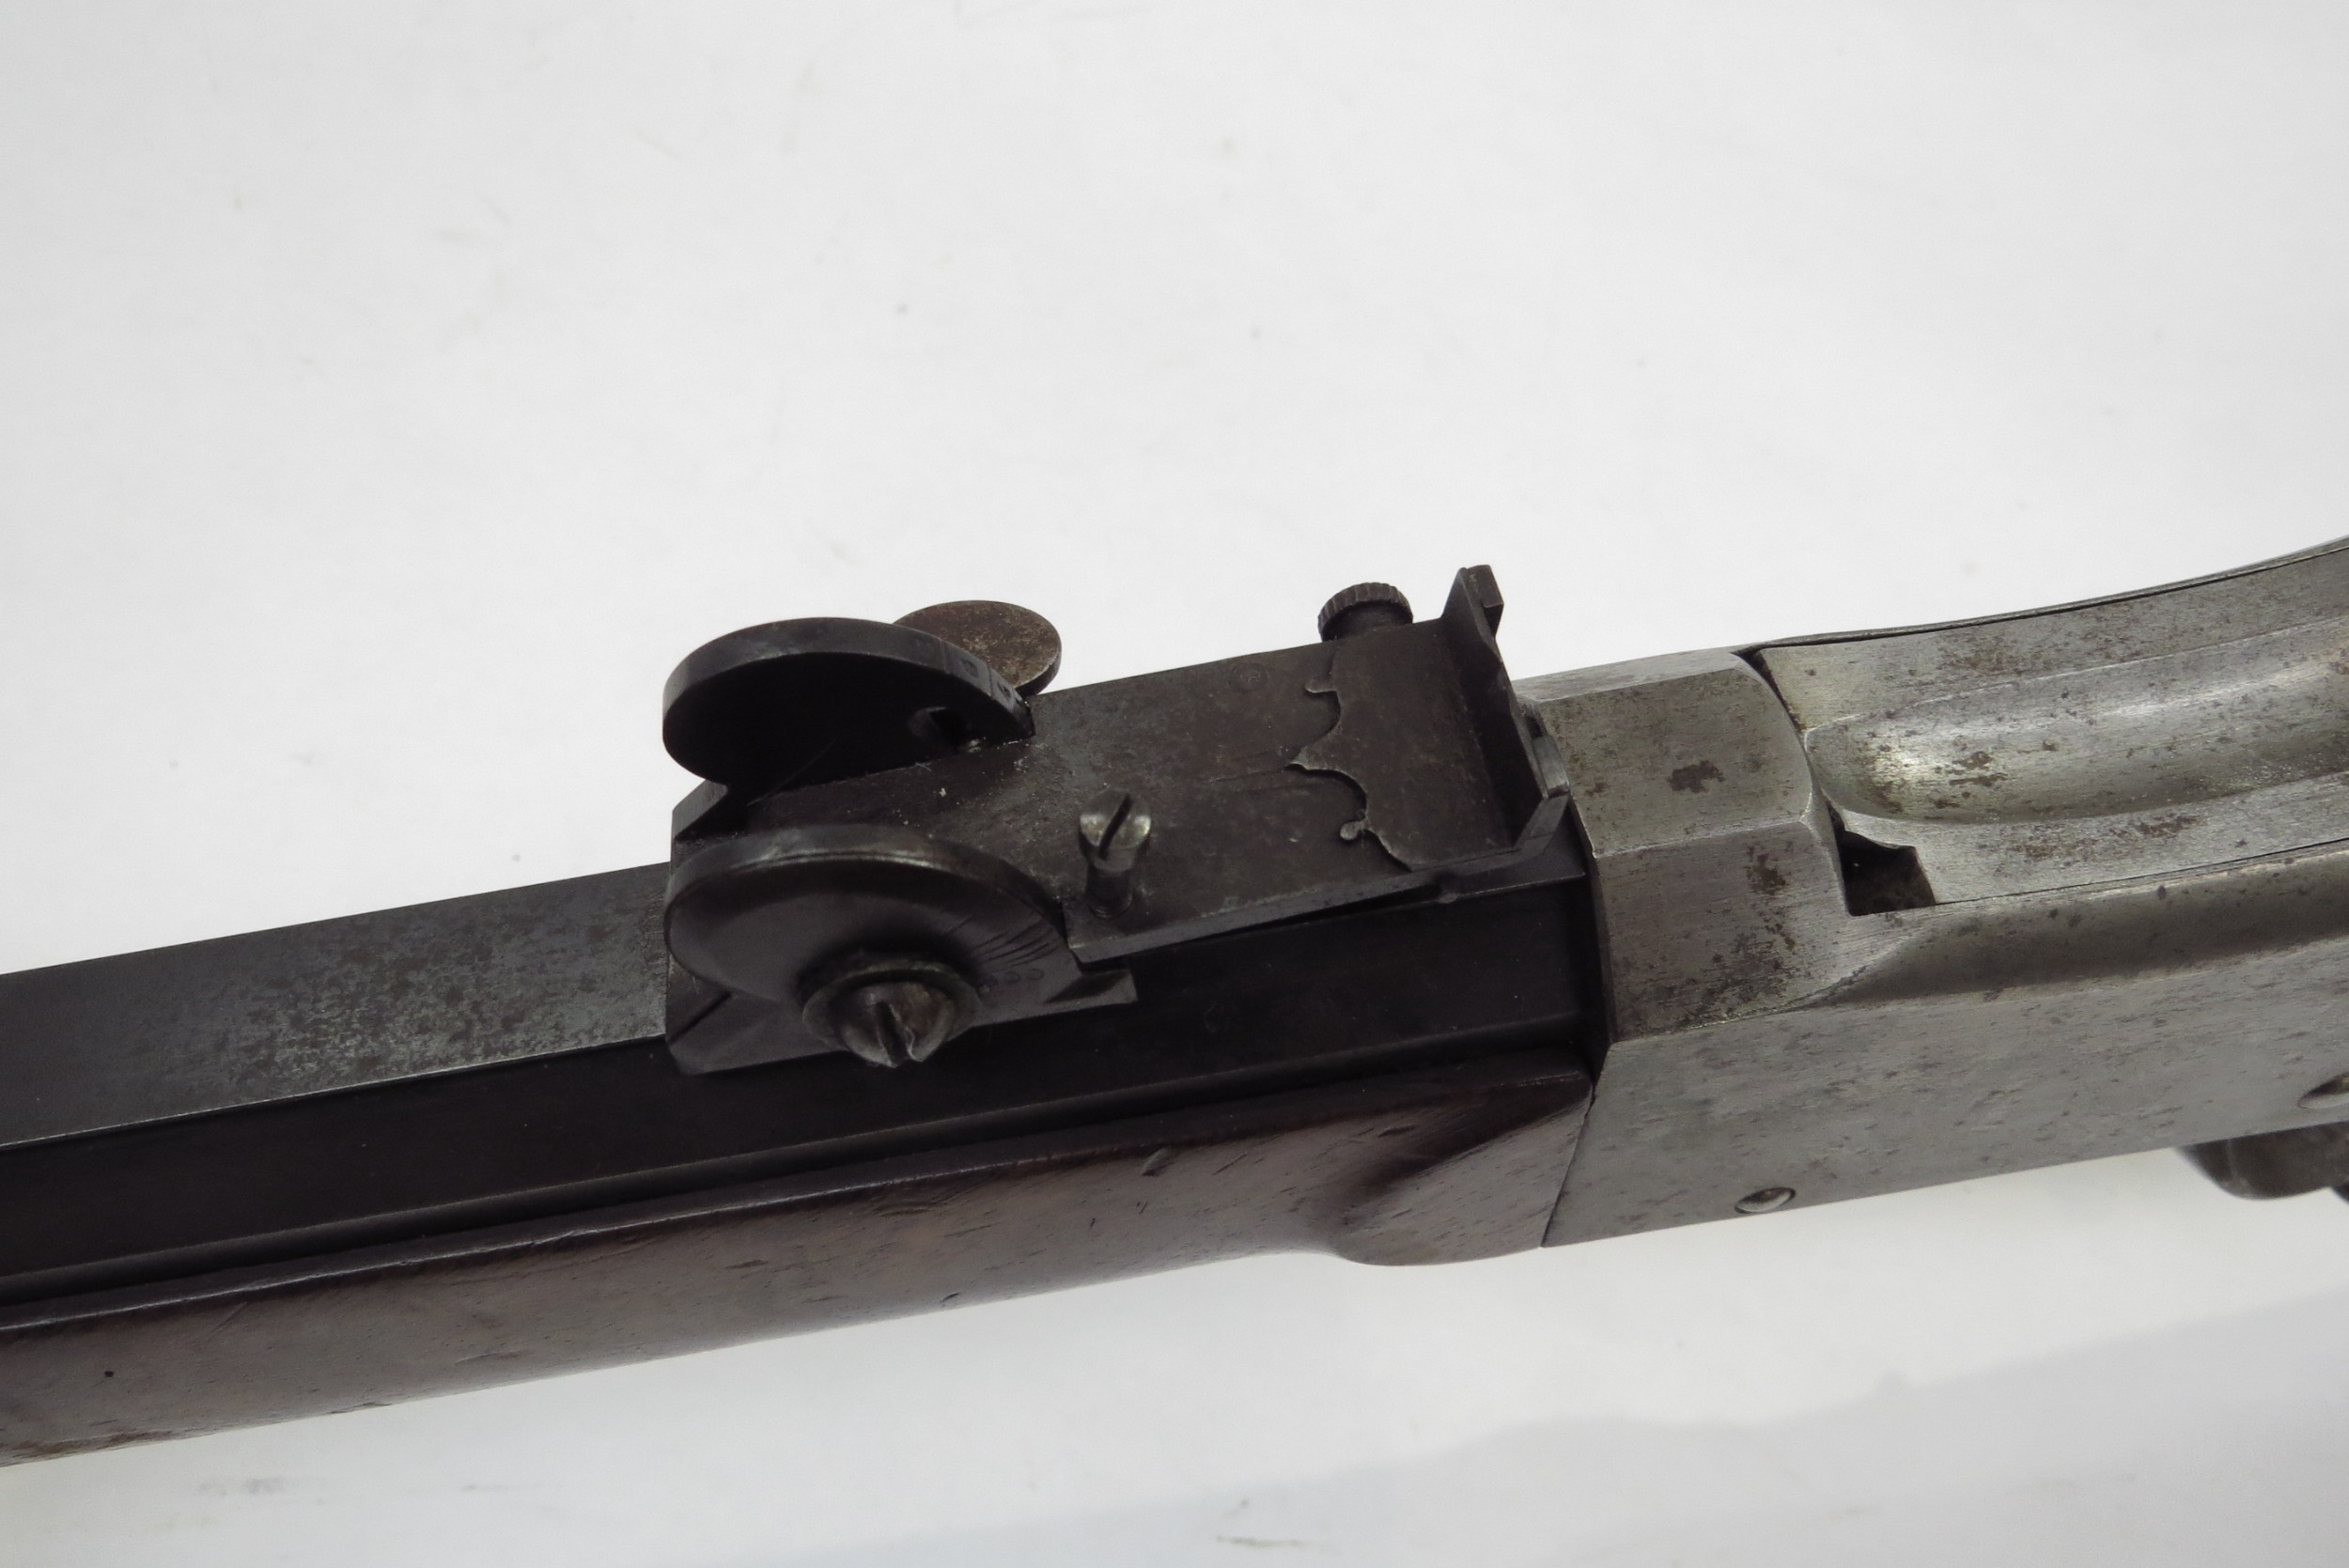 A late 19th Century Swiss Martini action obsolete calibre 7.5 x 53 rimless cartridge target rifle, - Image 7 of 8